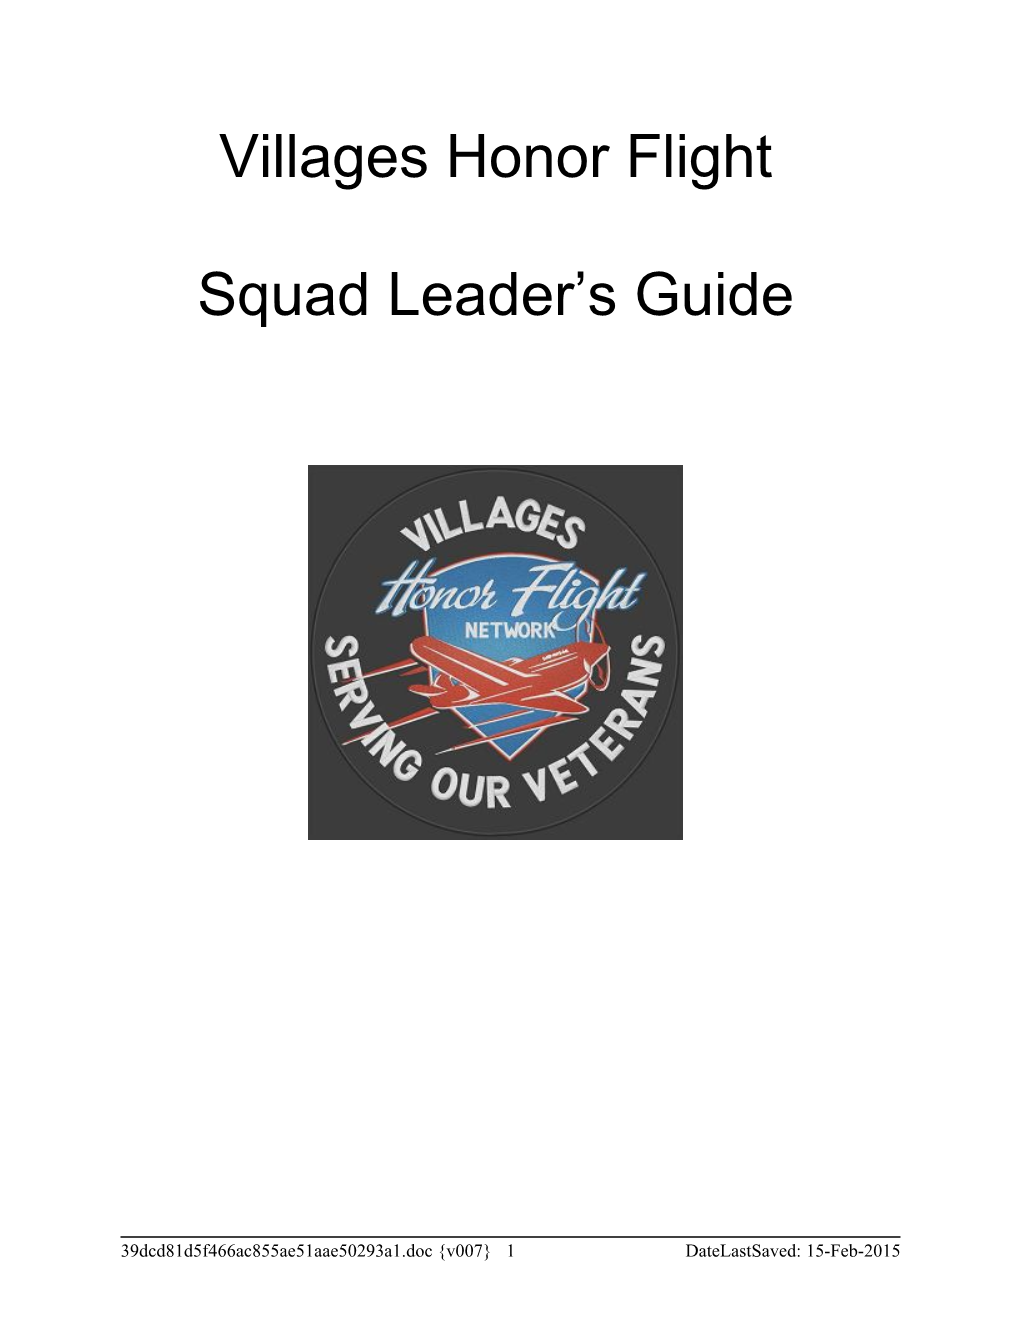 VHF Guardians Guide